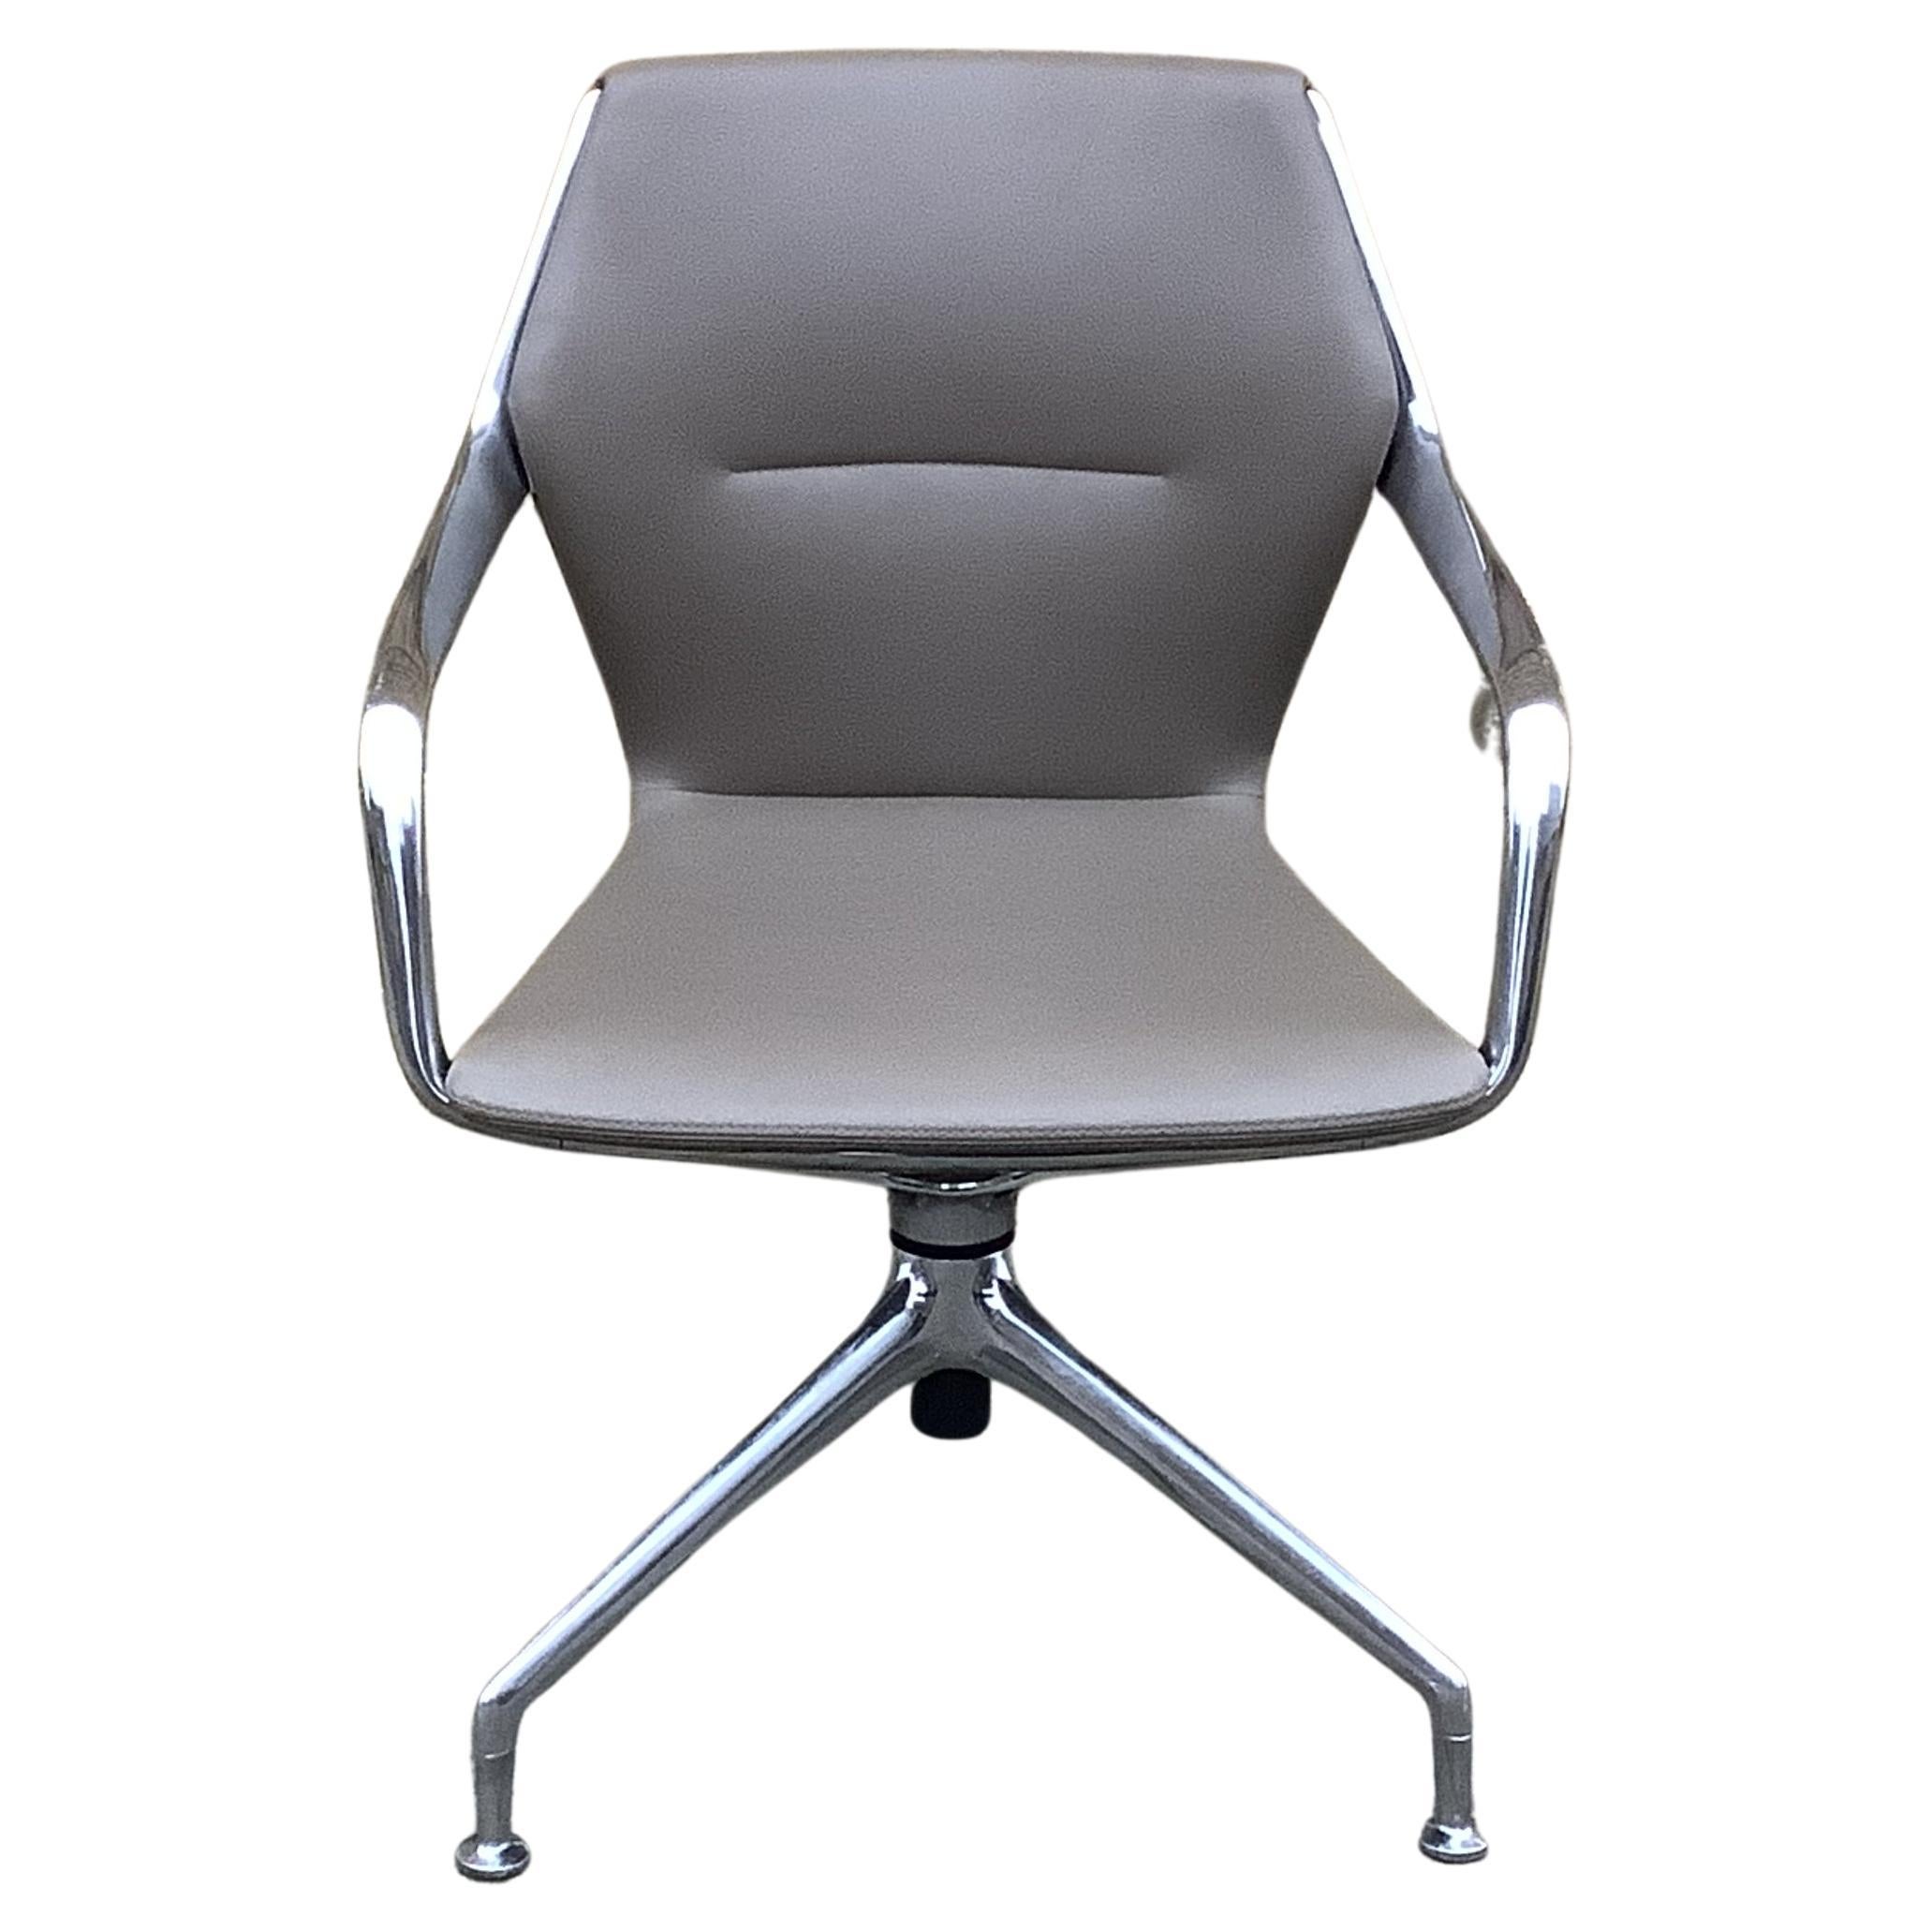 Combining the same seating dynamics as its successful cantilever predecessor, the new swivel version of Ray offers even more forms of flexibility and comfort. Floating above the die-cast aluminium base is an upper assembly that springs, bounces and